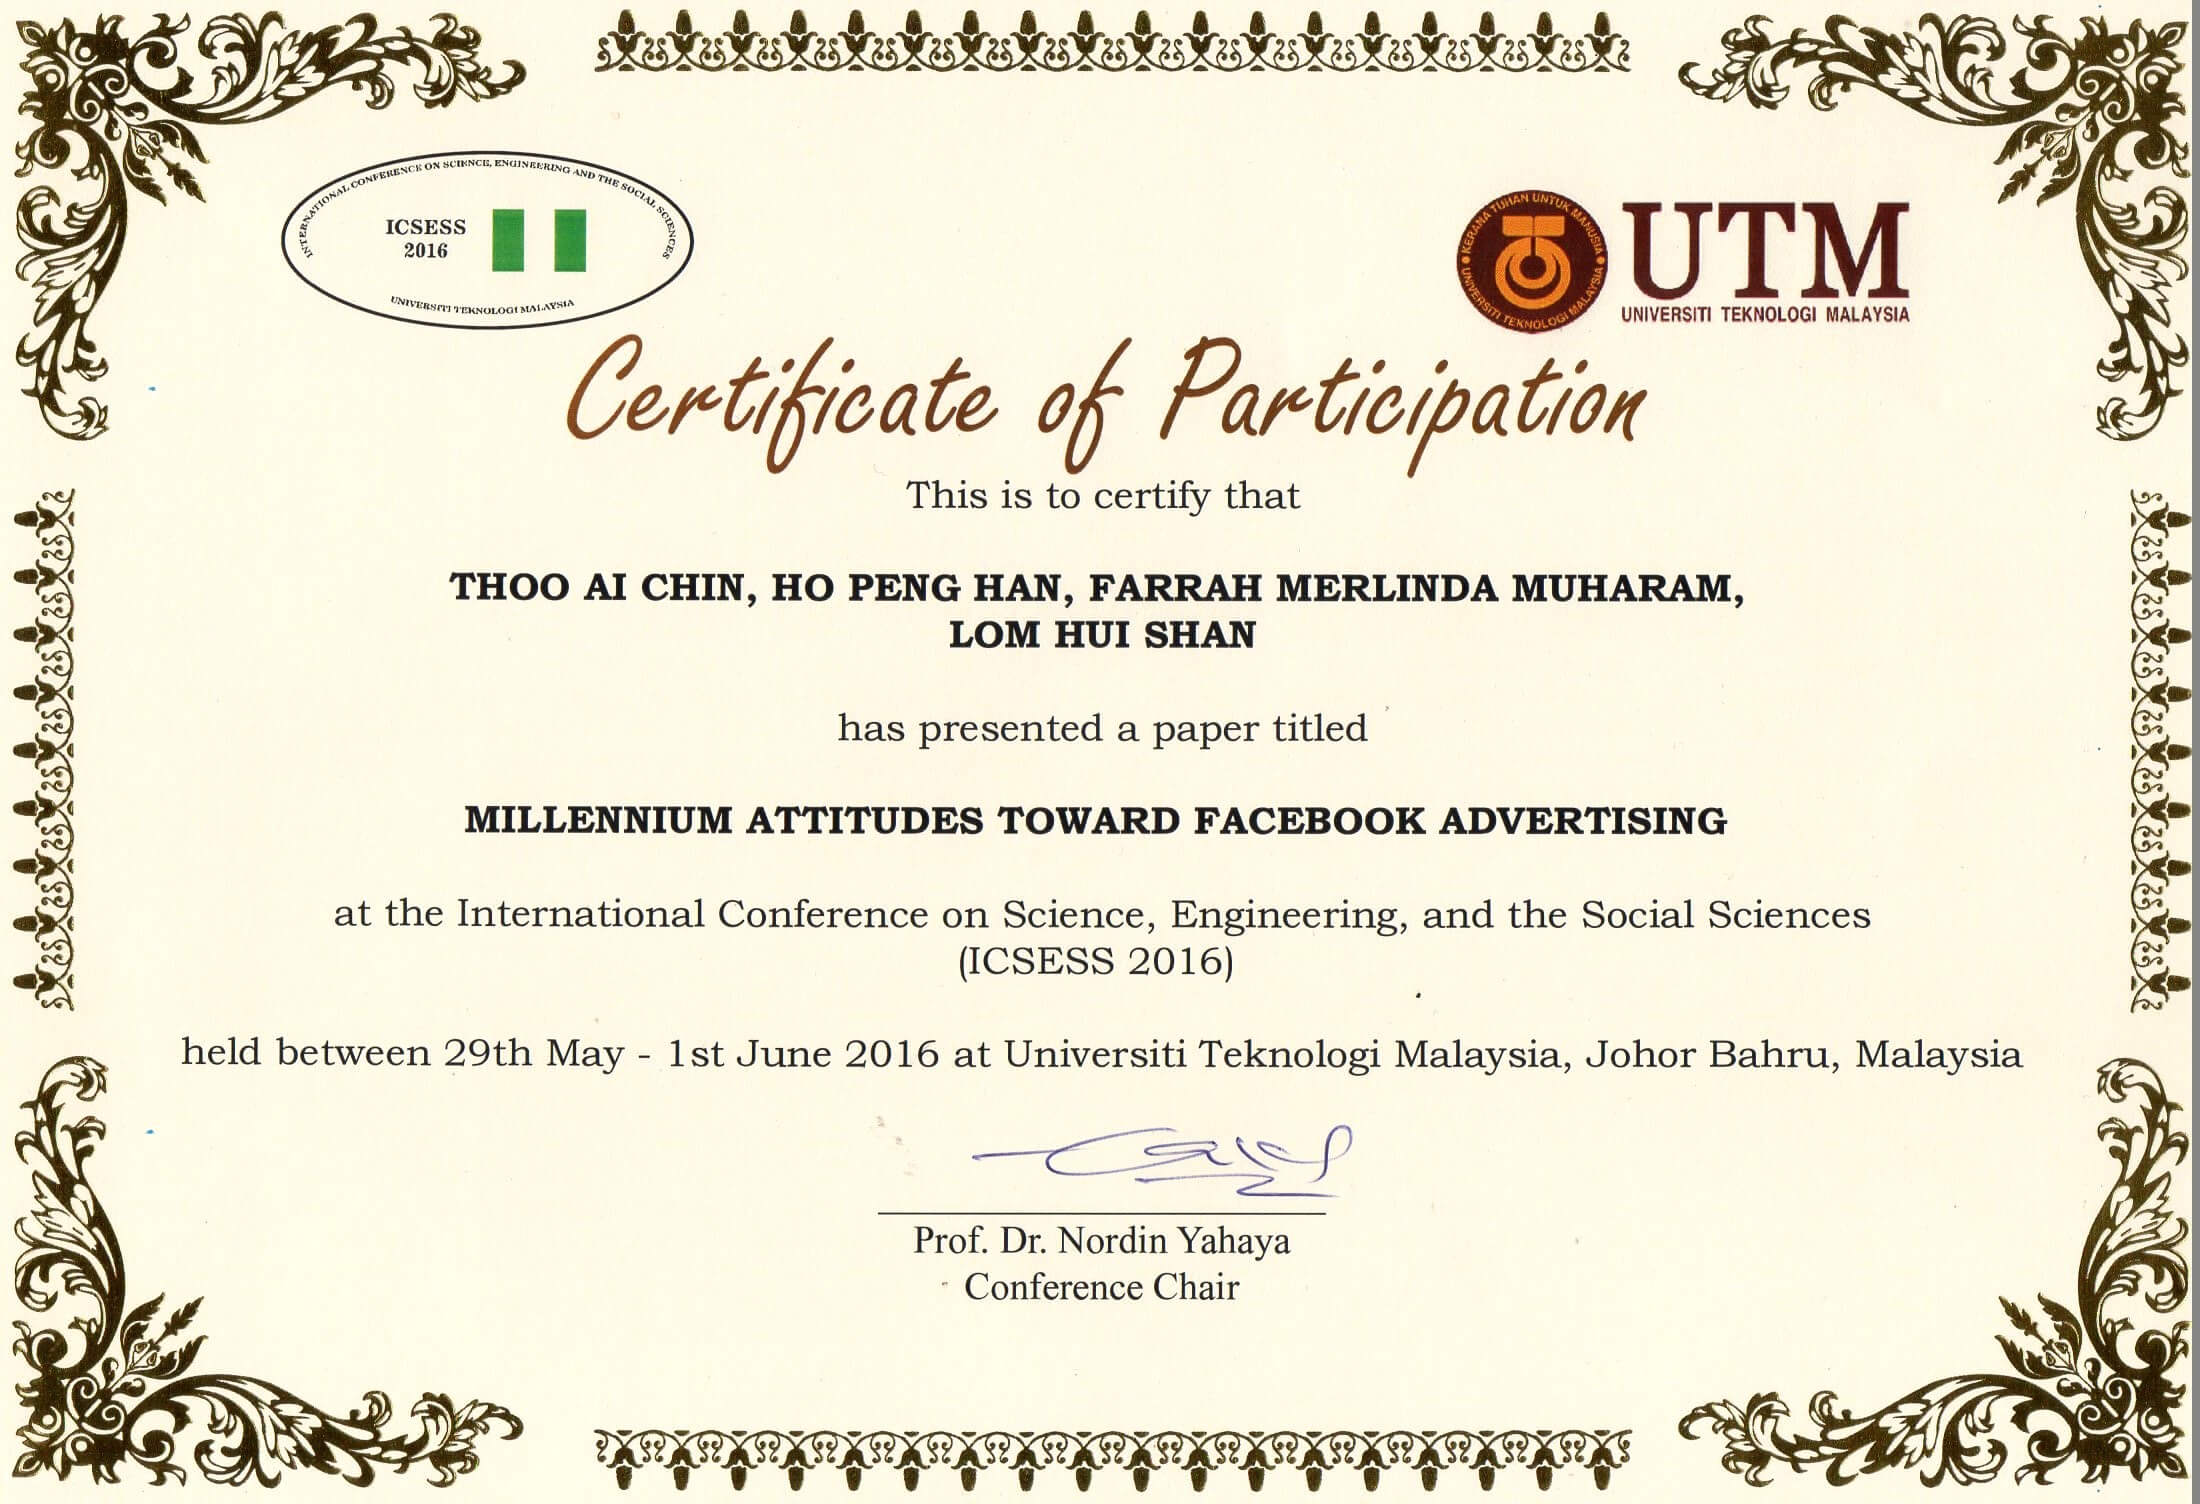 Conference Attendance Certificate Samples Fresh Template For International Conference Certificate Templates